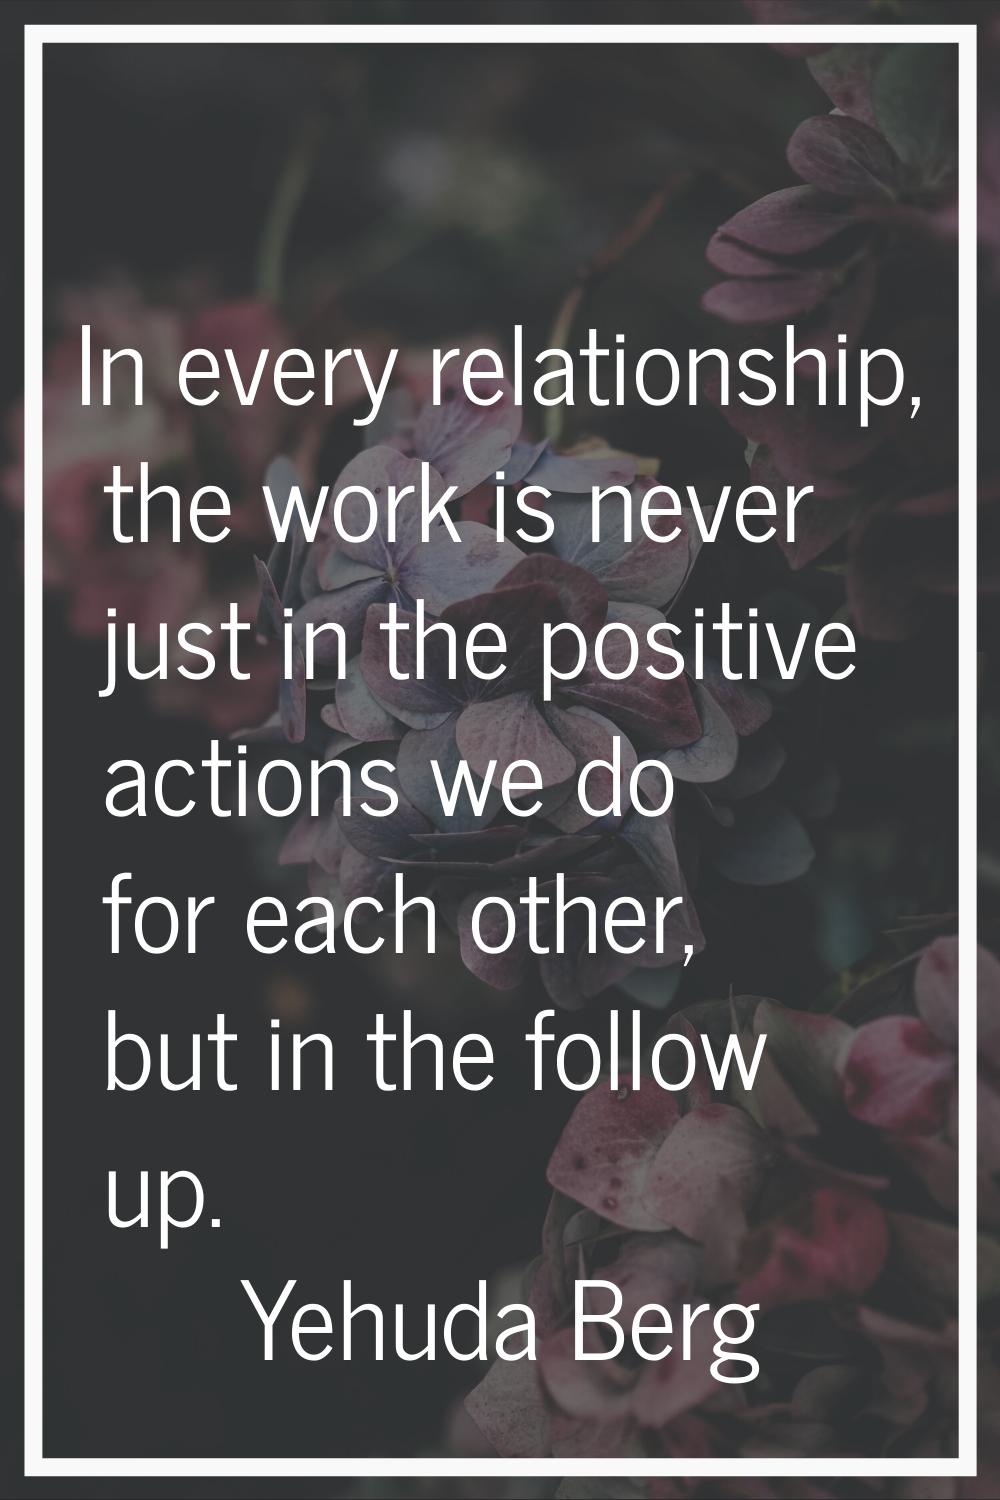 In every relationship, the work is never just in the positive actions we do for each other, but in 